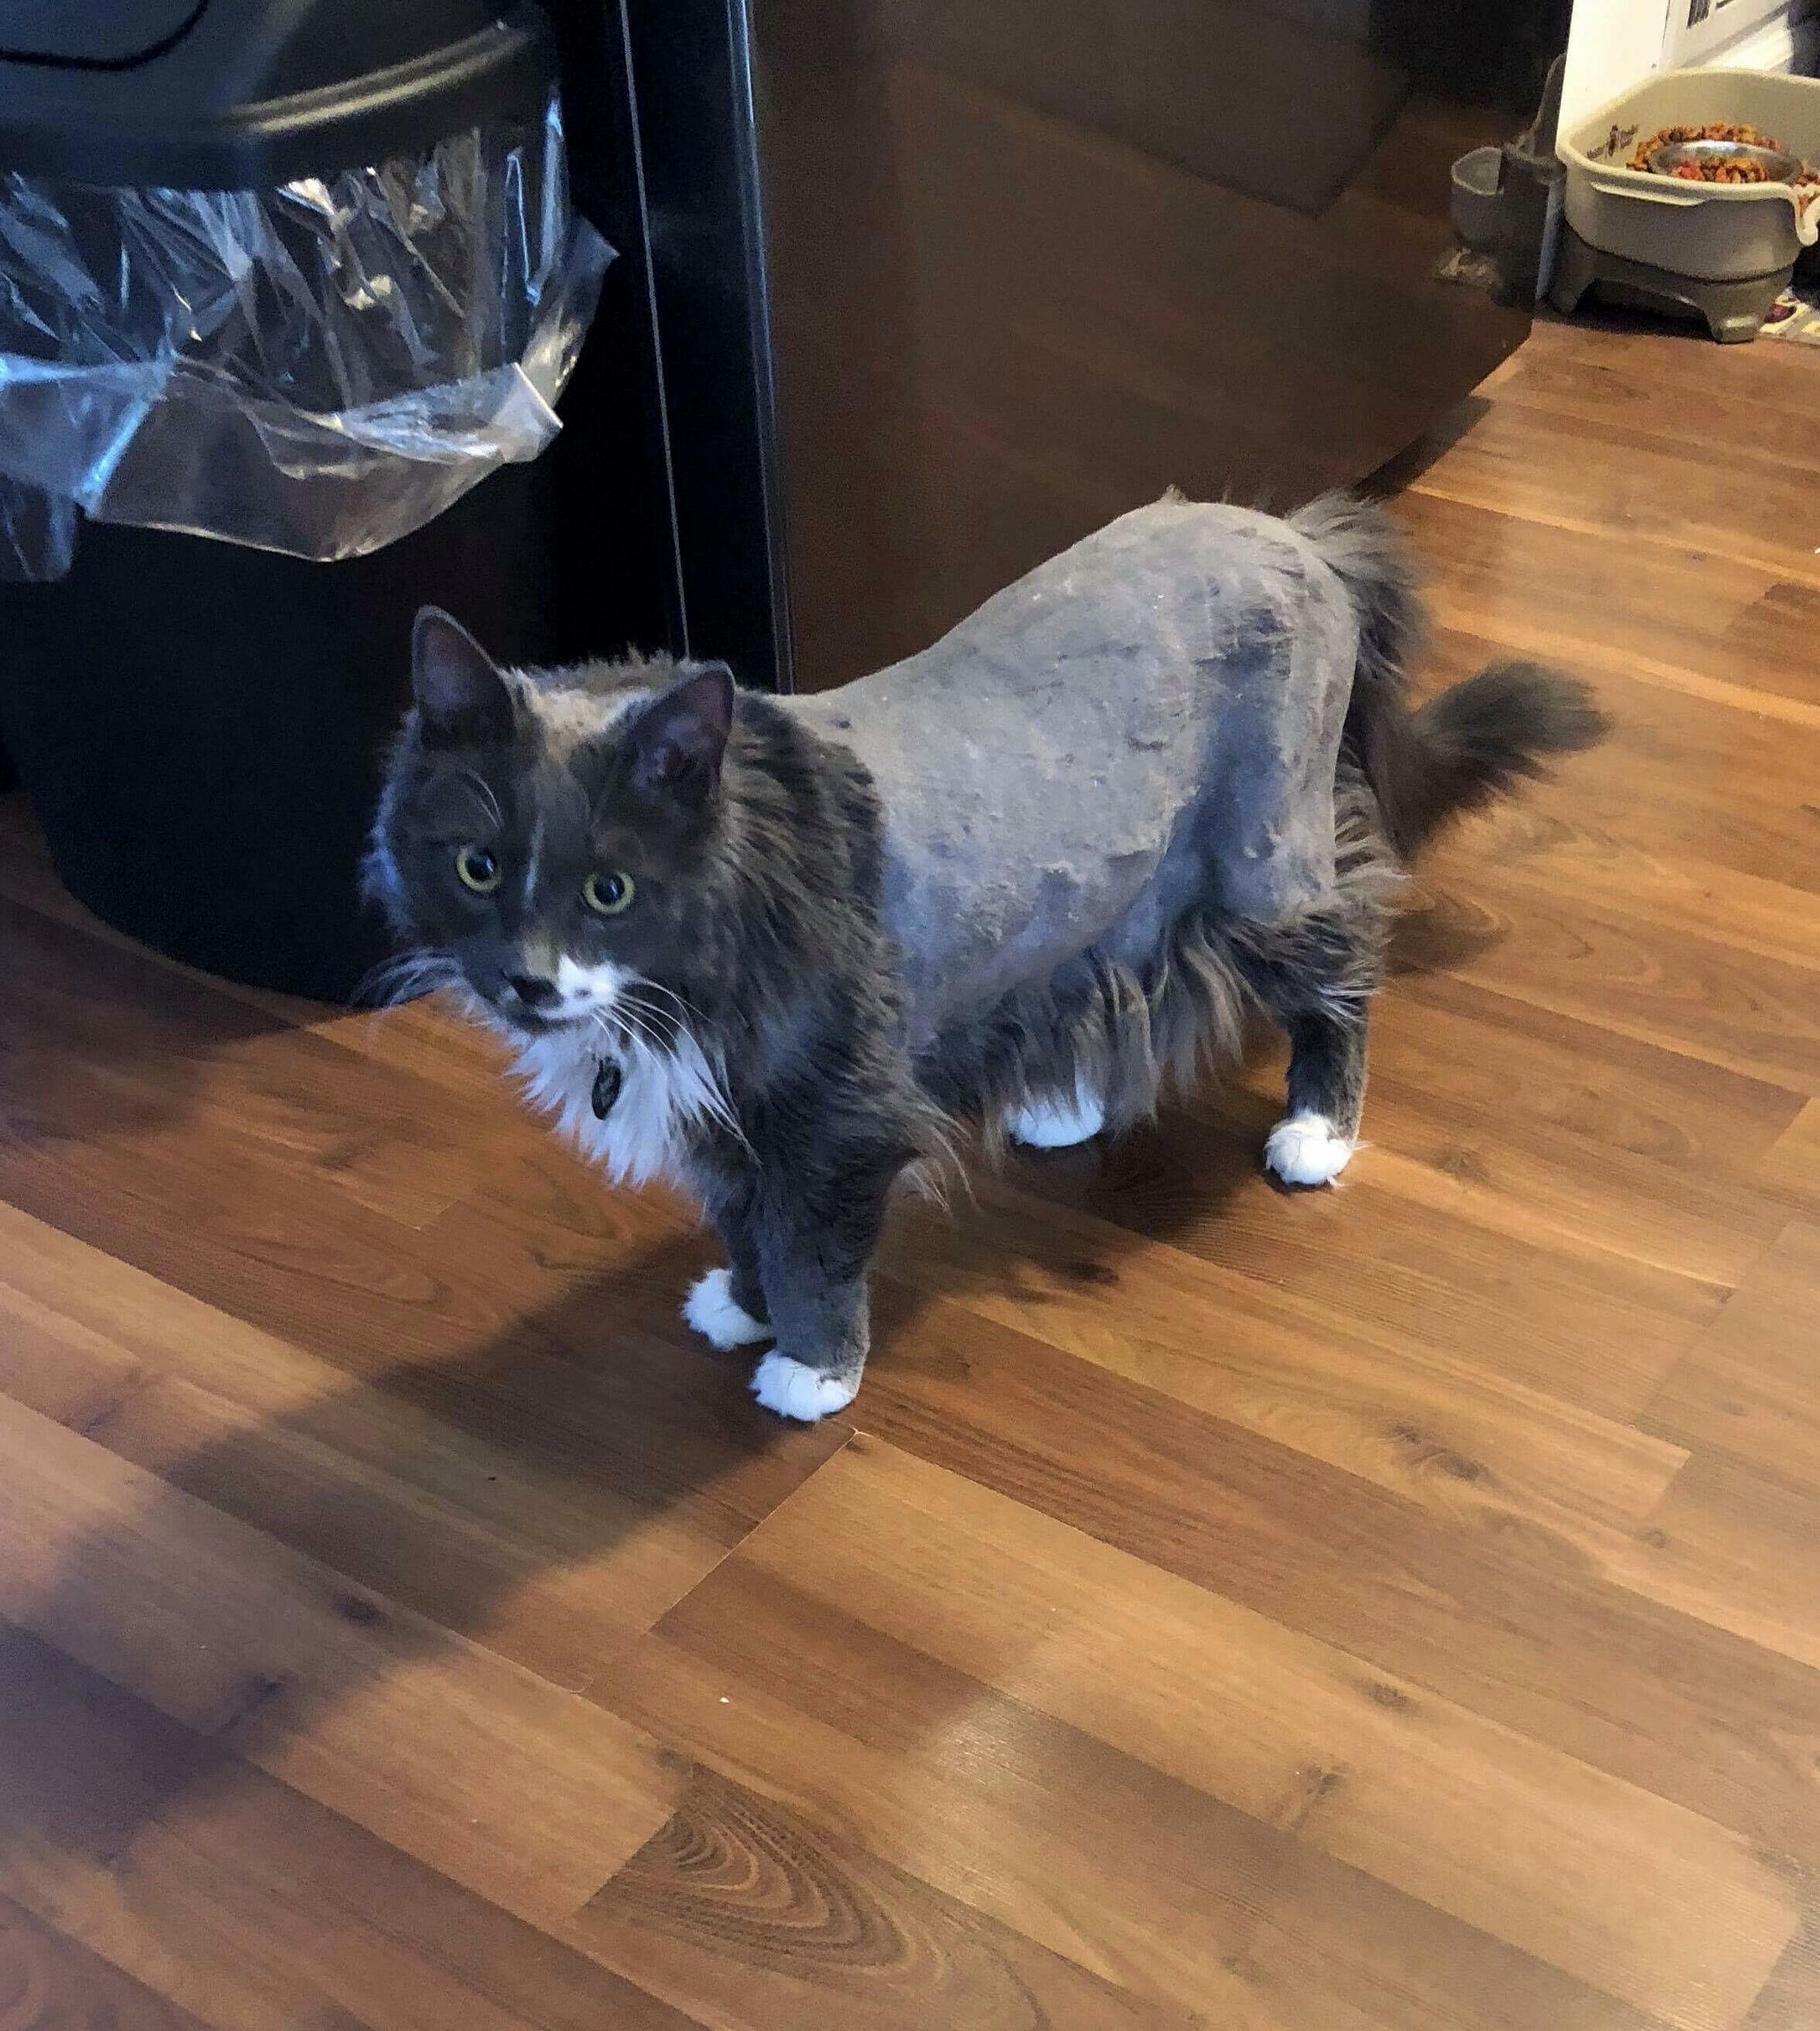 My parents shaved their cat and i cant stop laughing